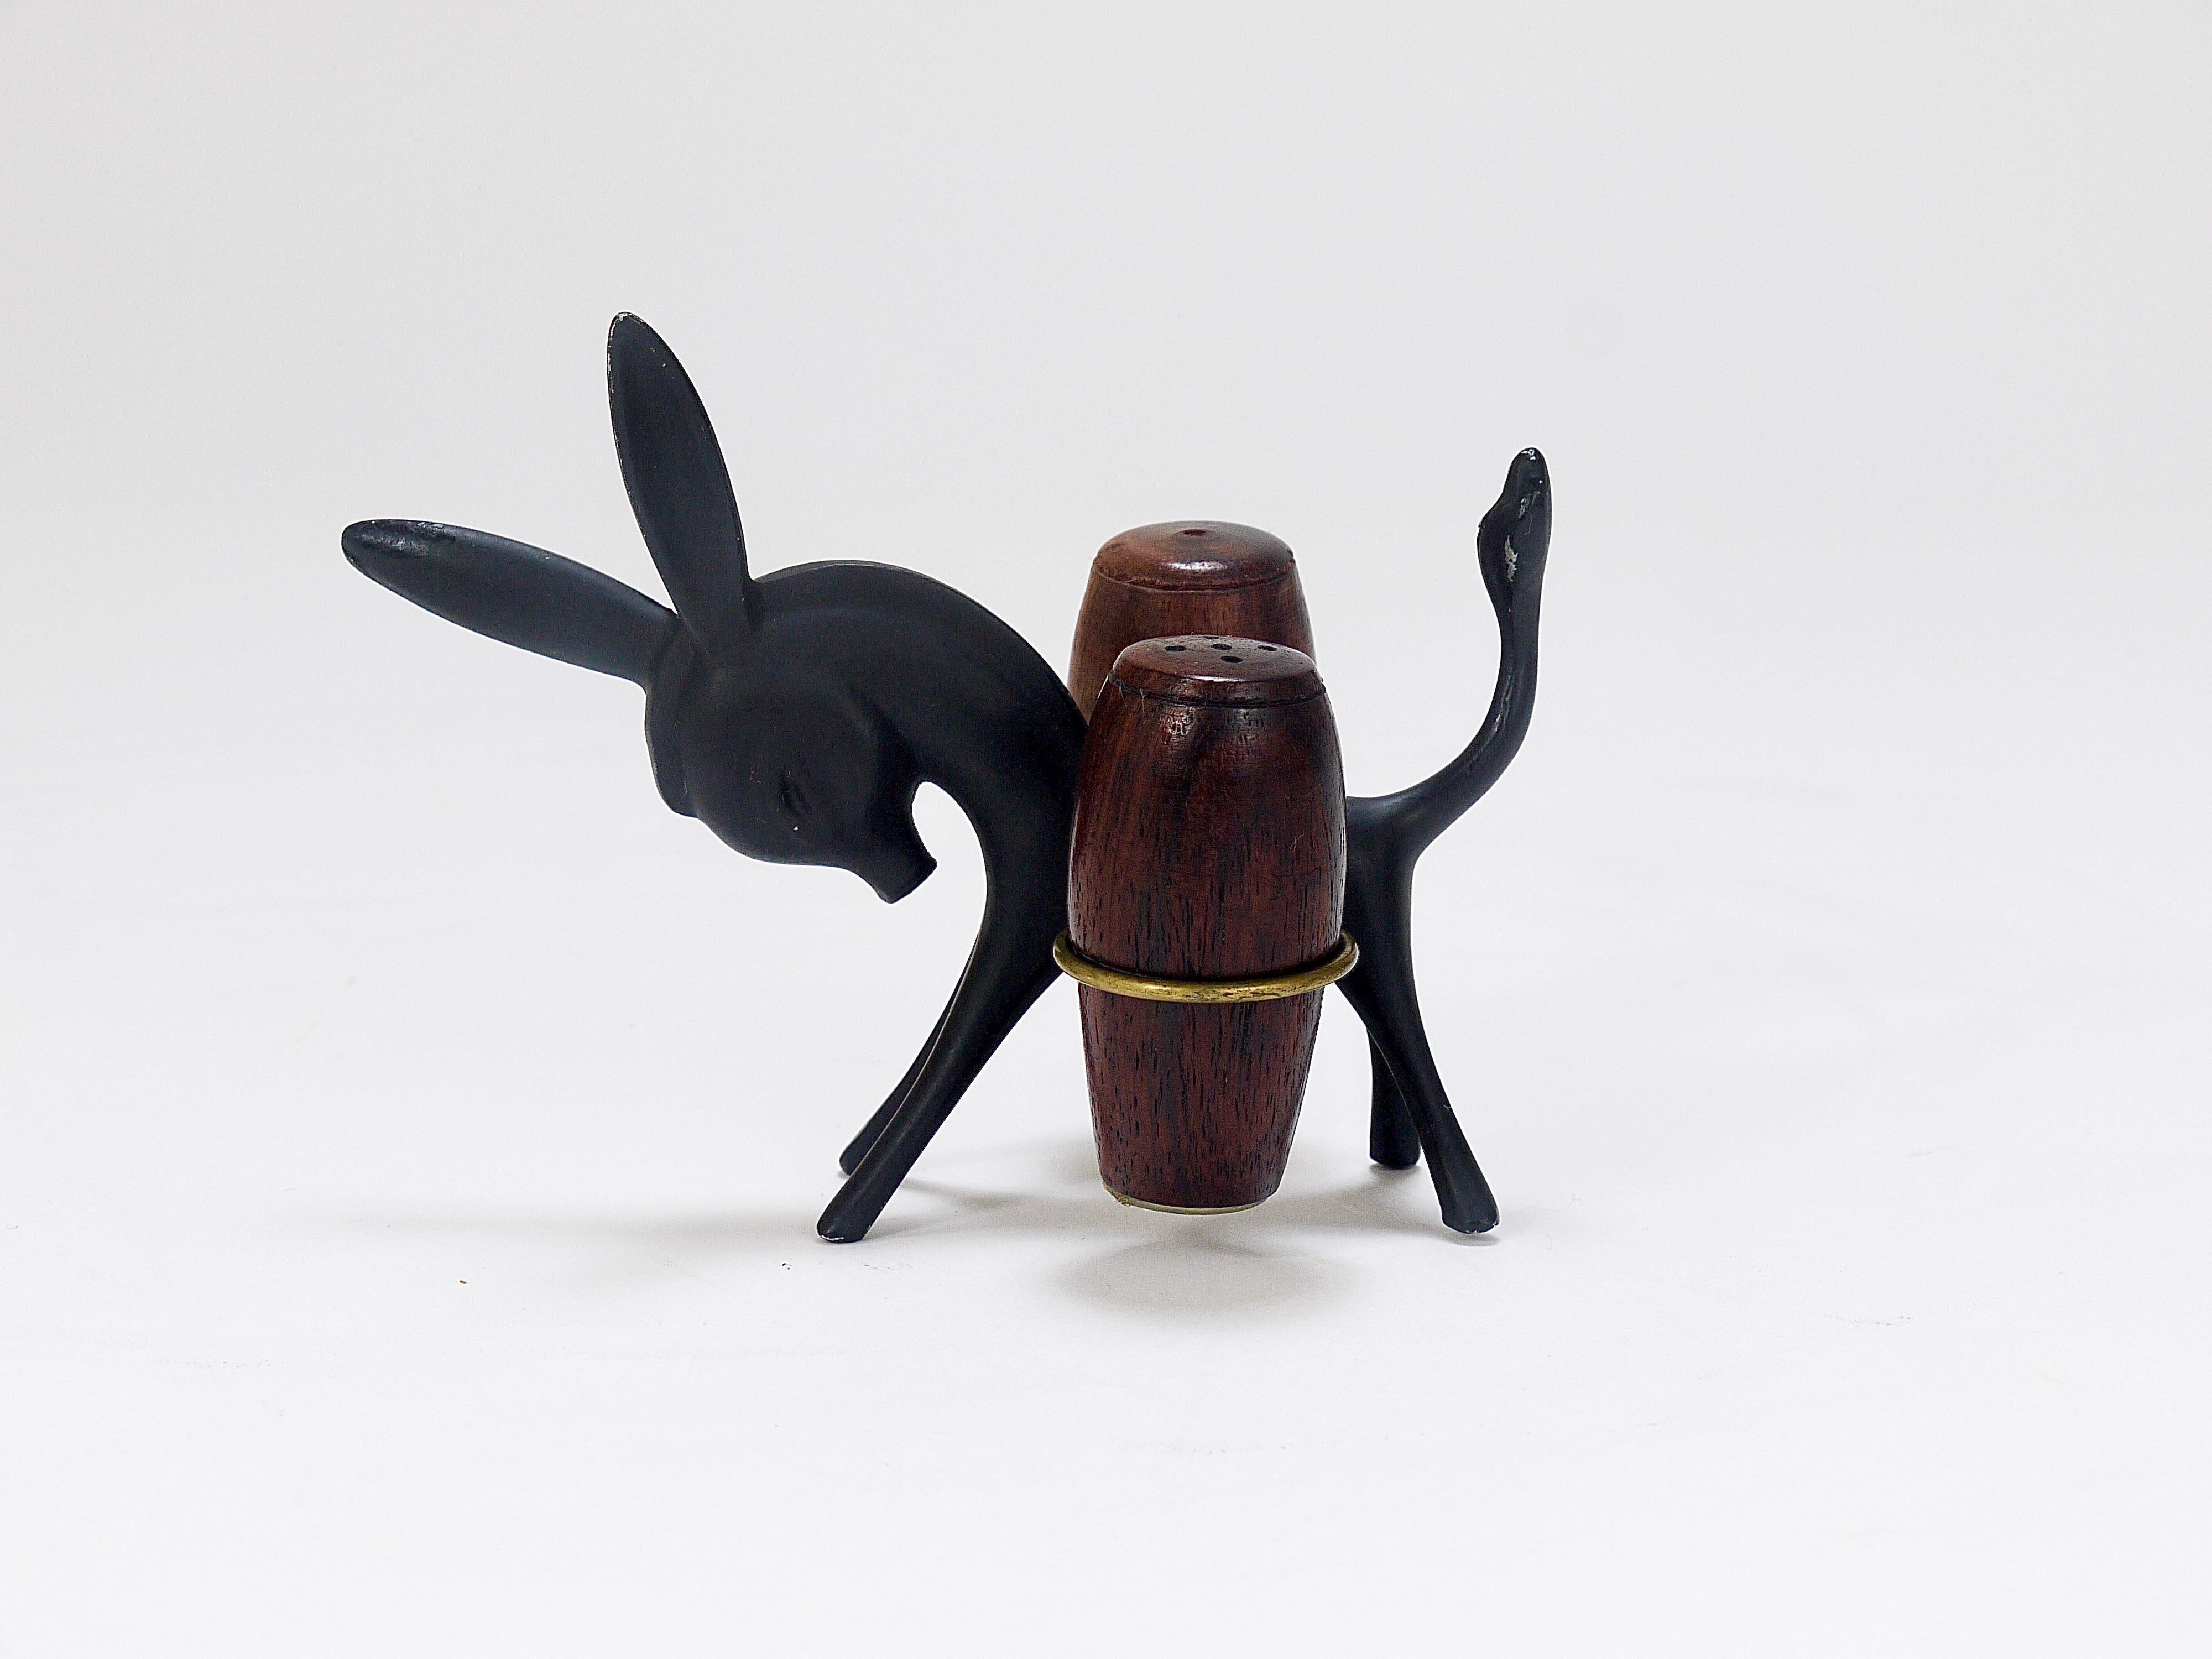 A charming Austrian midcentury Shaker set, displaying a donkey carrying two wooden barrels. A humorous design by Walter Bosse, executed by Hertha Baller Austria in the 1950s. The donkey is made of blackened metal and brass, the barrels are made of